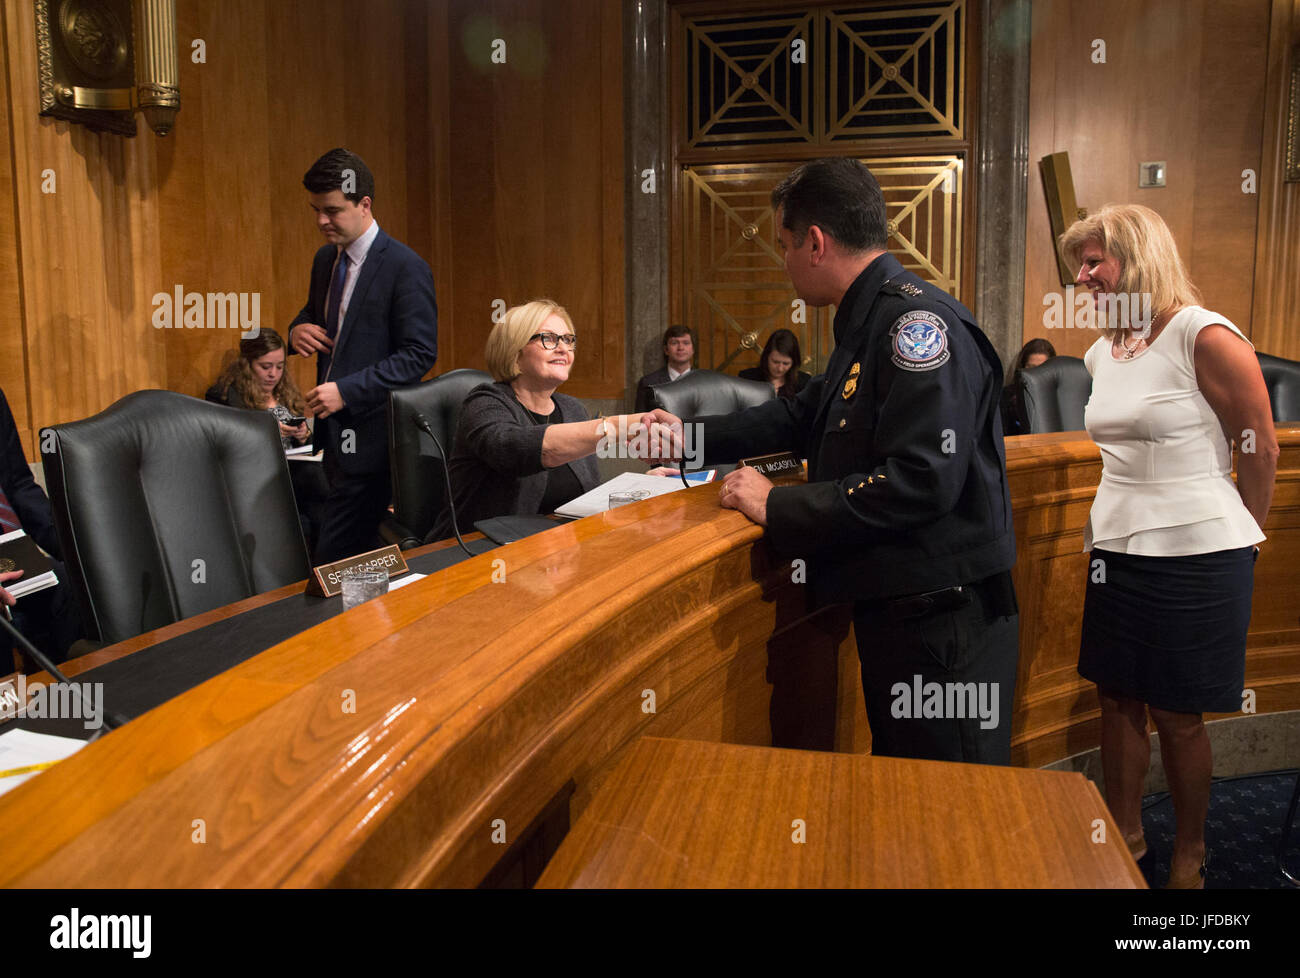 U.S. Customs and Border Protection Acting Executive Assistant Commissioner for Operations Support Robert Perez introduces himself to Sen. Claire Conner McCaskill prior to testifying before the Senate Governmental Affairs Committee during a subcommittee hearing on U.S. strategy to combat illicit drugs in the Permanent Subcommittee on Investigations titledÔ 'Stopping the Shipment of Synthetic Opioids: Oversight of U.S. Strategy to Combat Illicit Drugs' in Washington, D.C., May 25, 2017. U.S. Customs and Border Protection Stock Photo